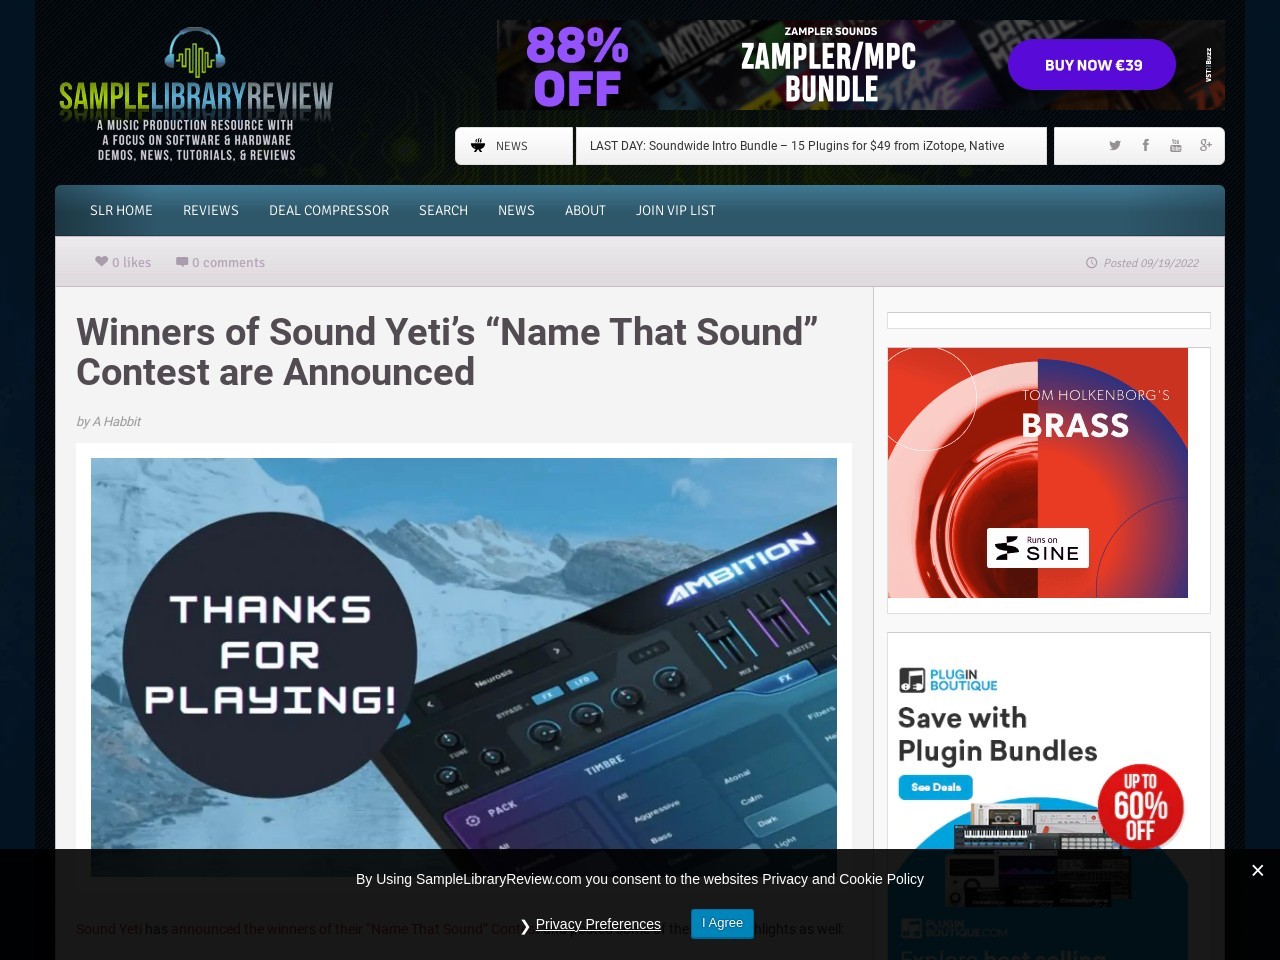 Winners of Sound Yeti's "Name That Sound" Contest are Announced - Sample Library Review